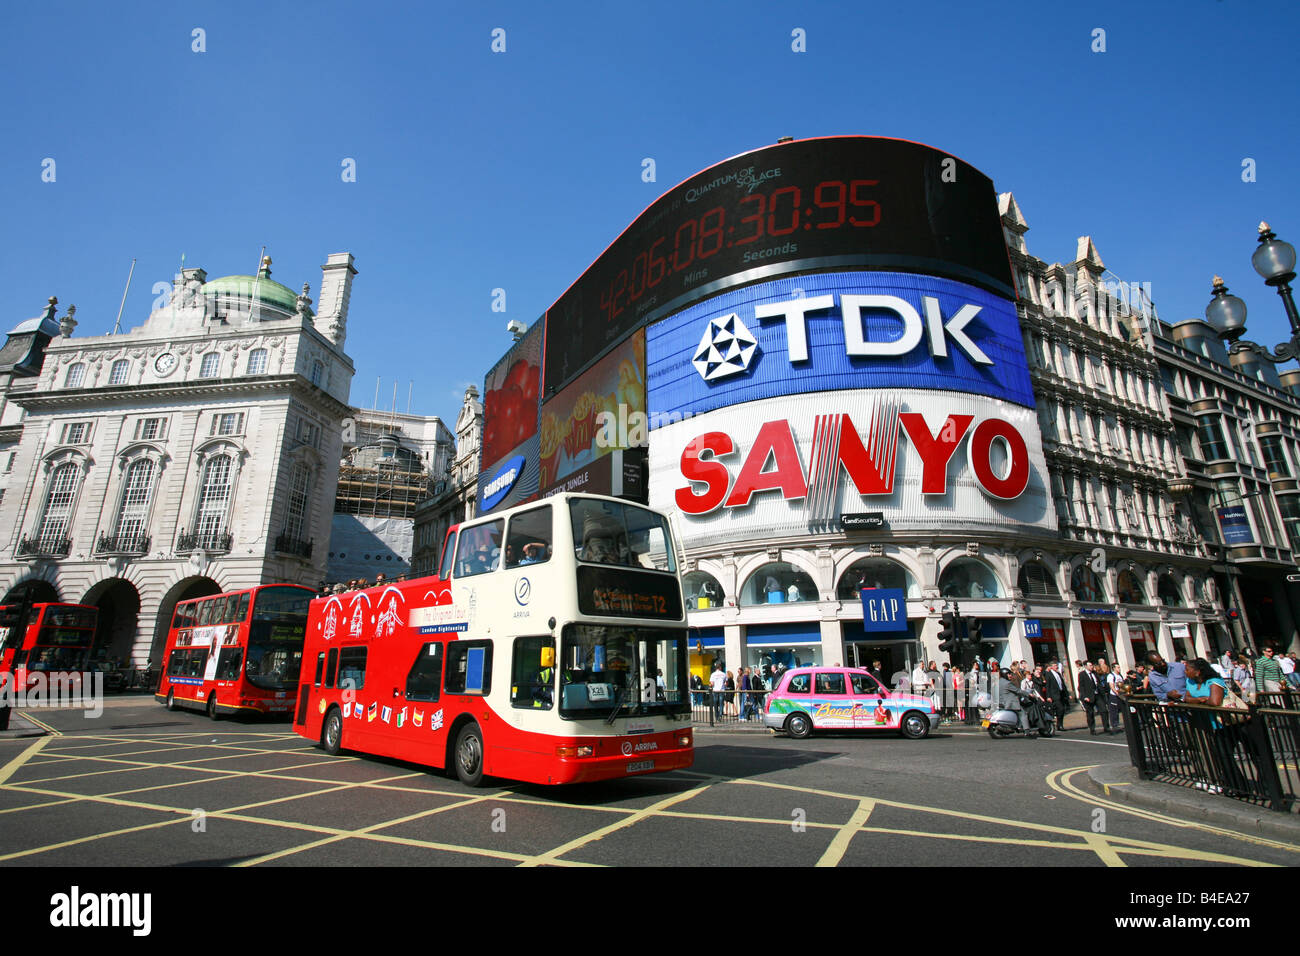 Red open top London double decker sightseeing tourist bus passes in front of famous neon signs in Piccadilly Circus London UK Stock Photo